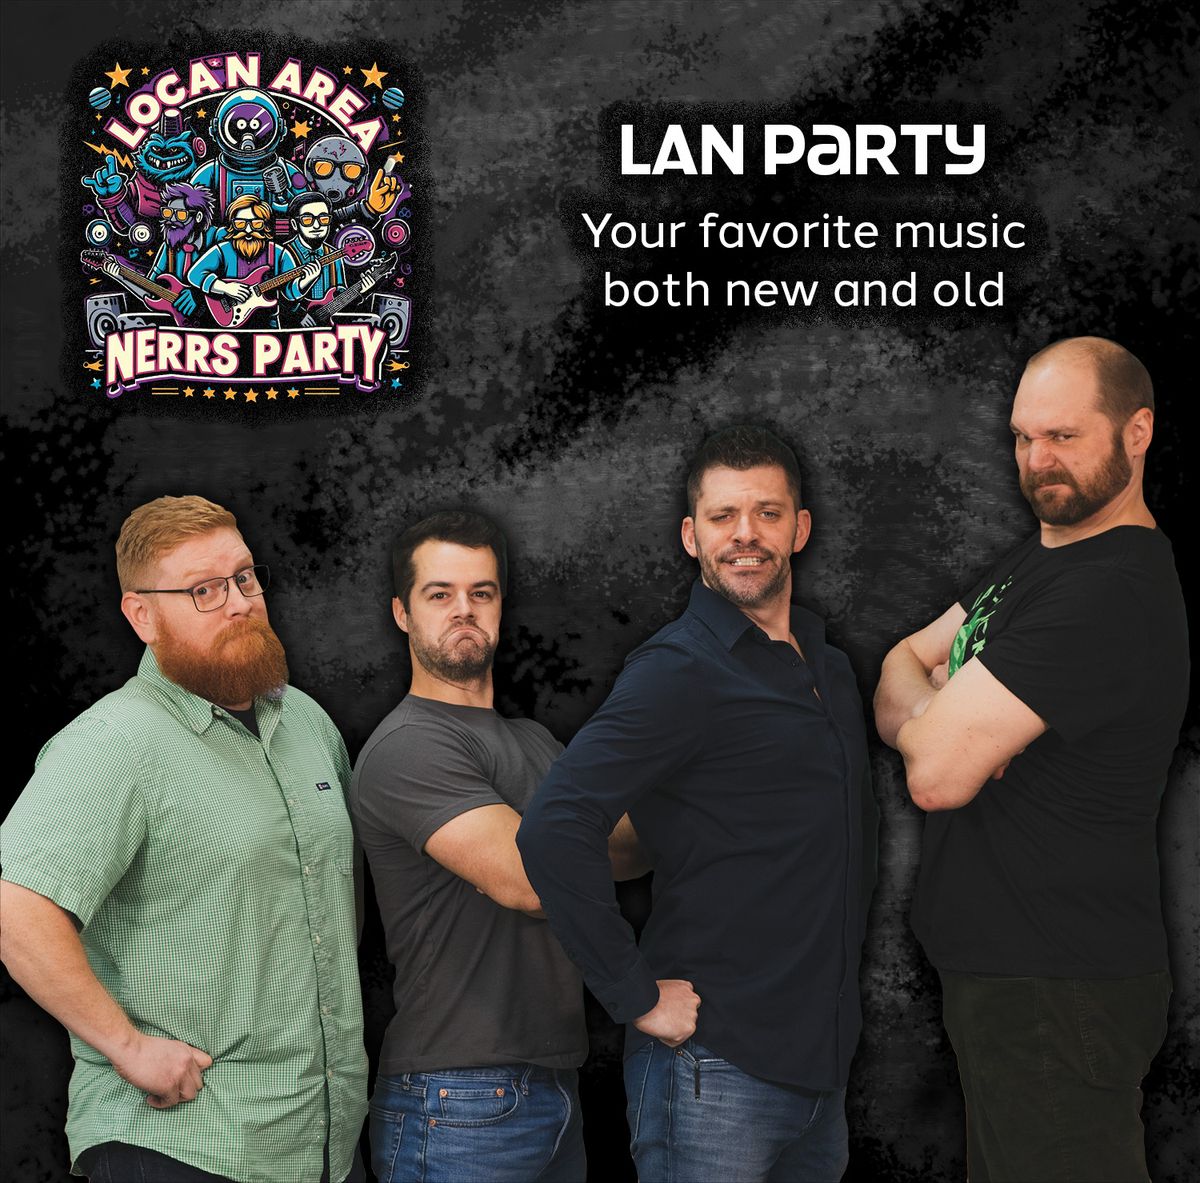 Come party with the LAN Party Band